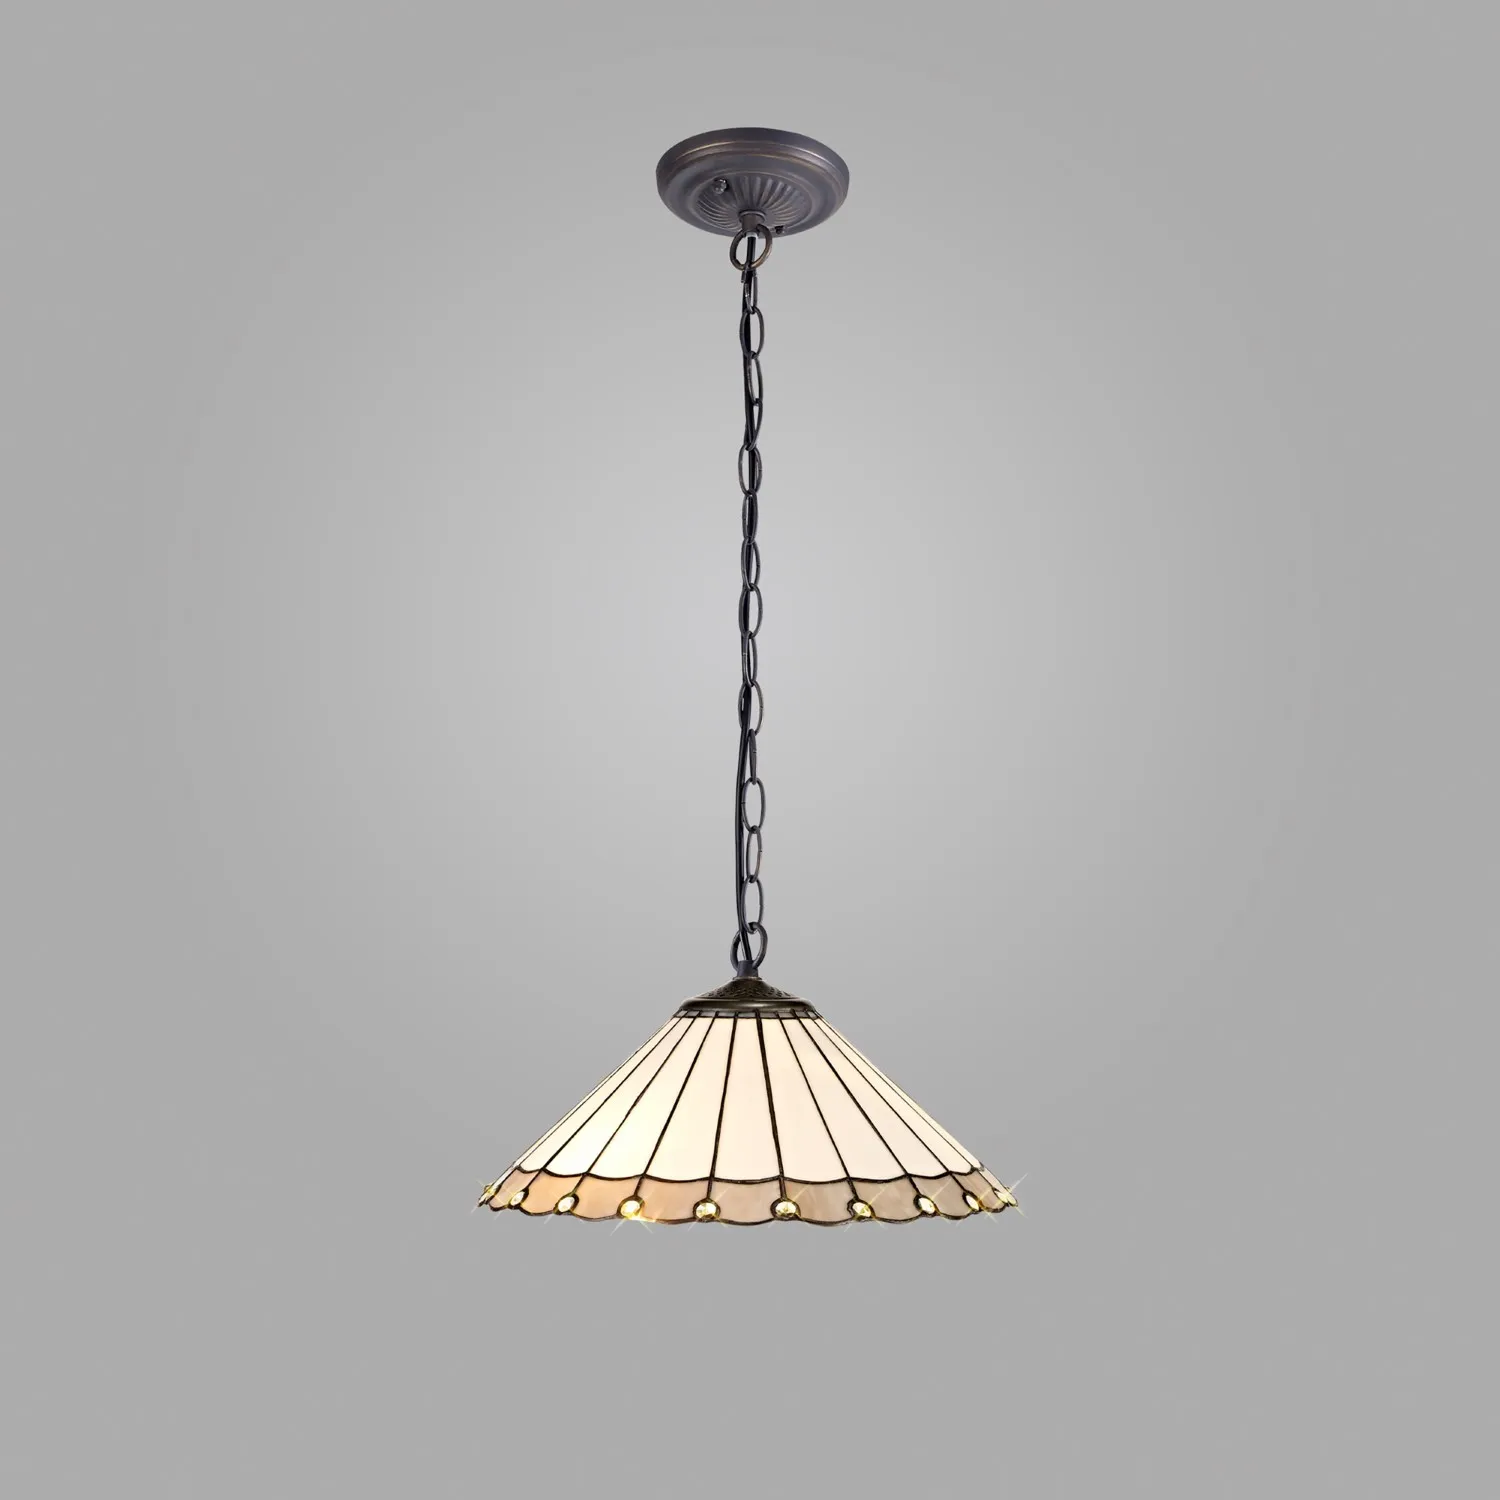 Ware 1 Light Downlighter Pendant E27 With 40cm Tiffany Shade, Grey Cream Crystal Aged Antique Brass